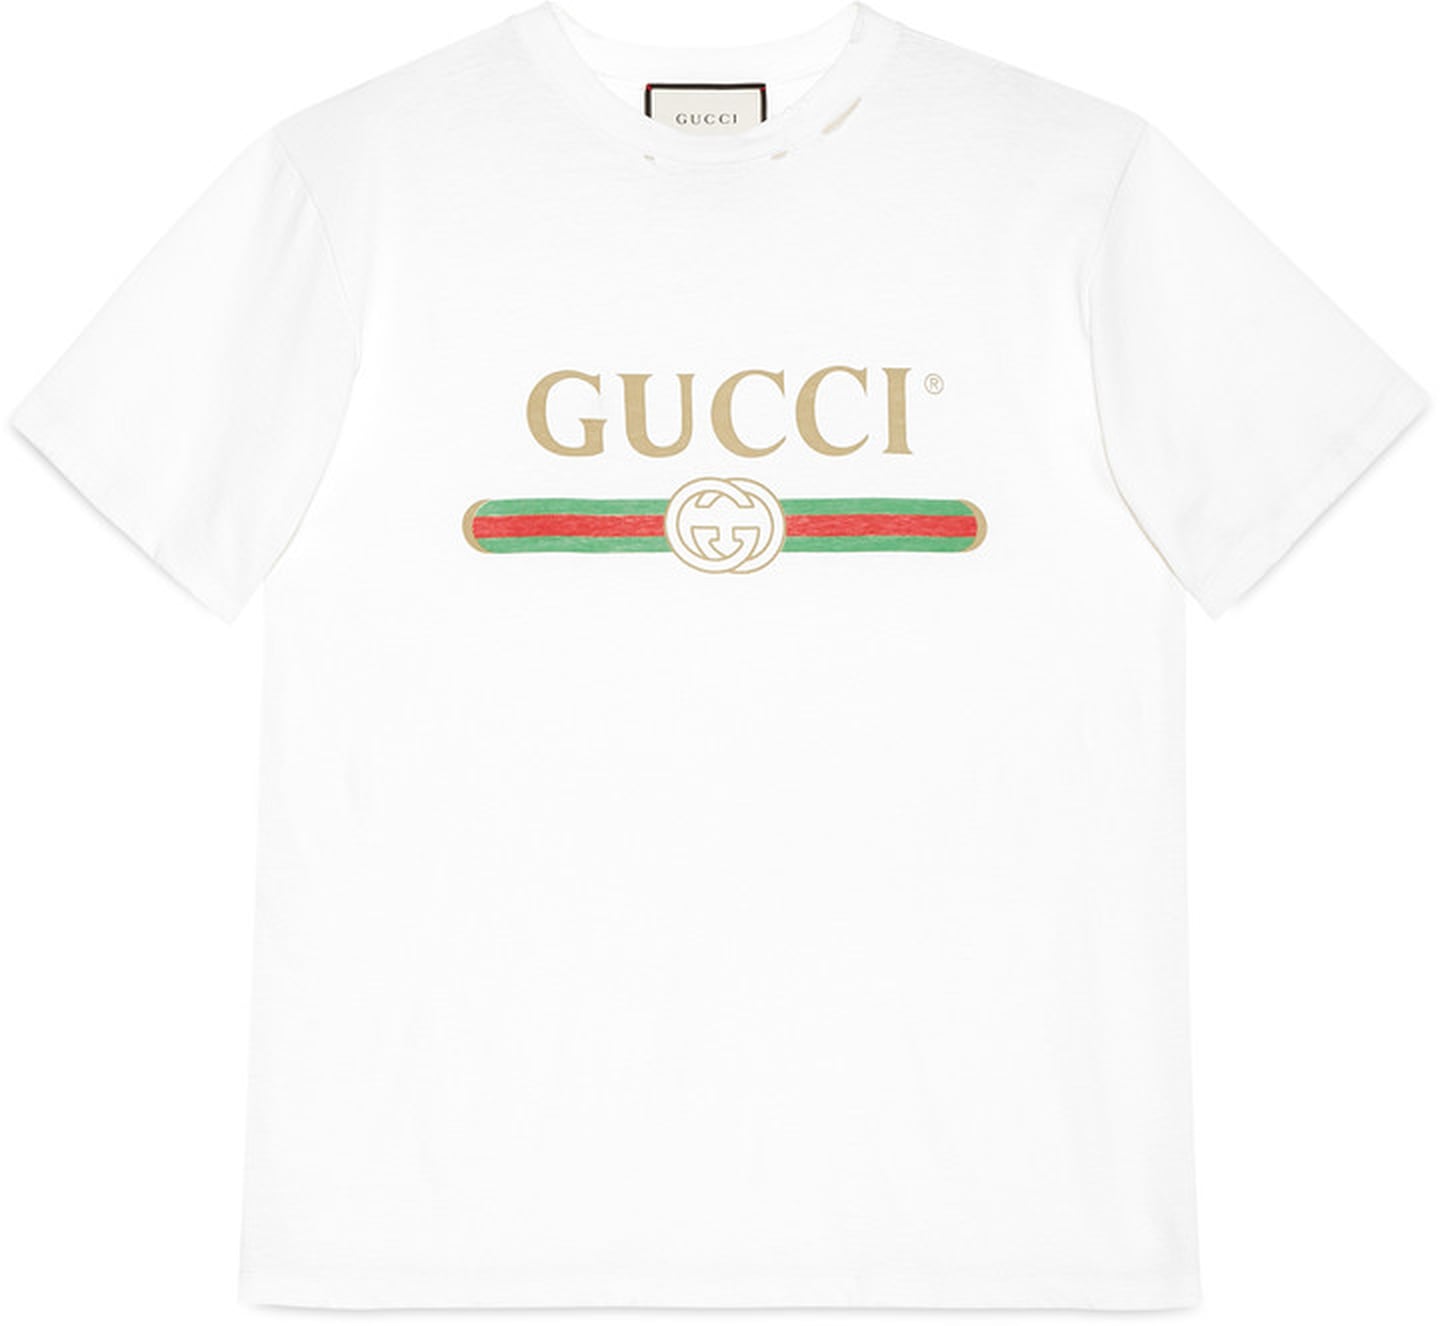 What to Buy From Gucci | POPSUGAR Fashion